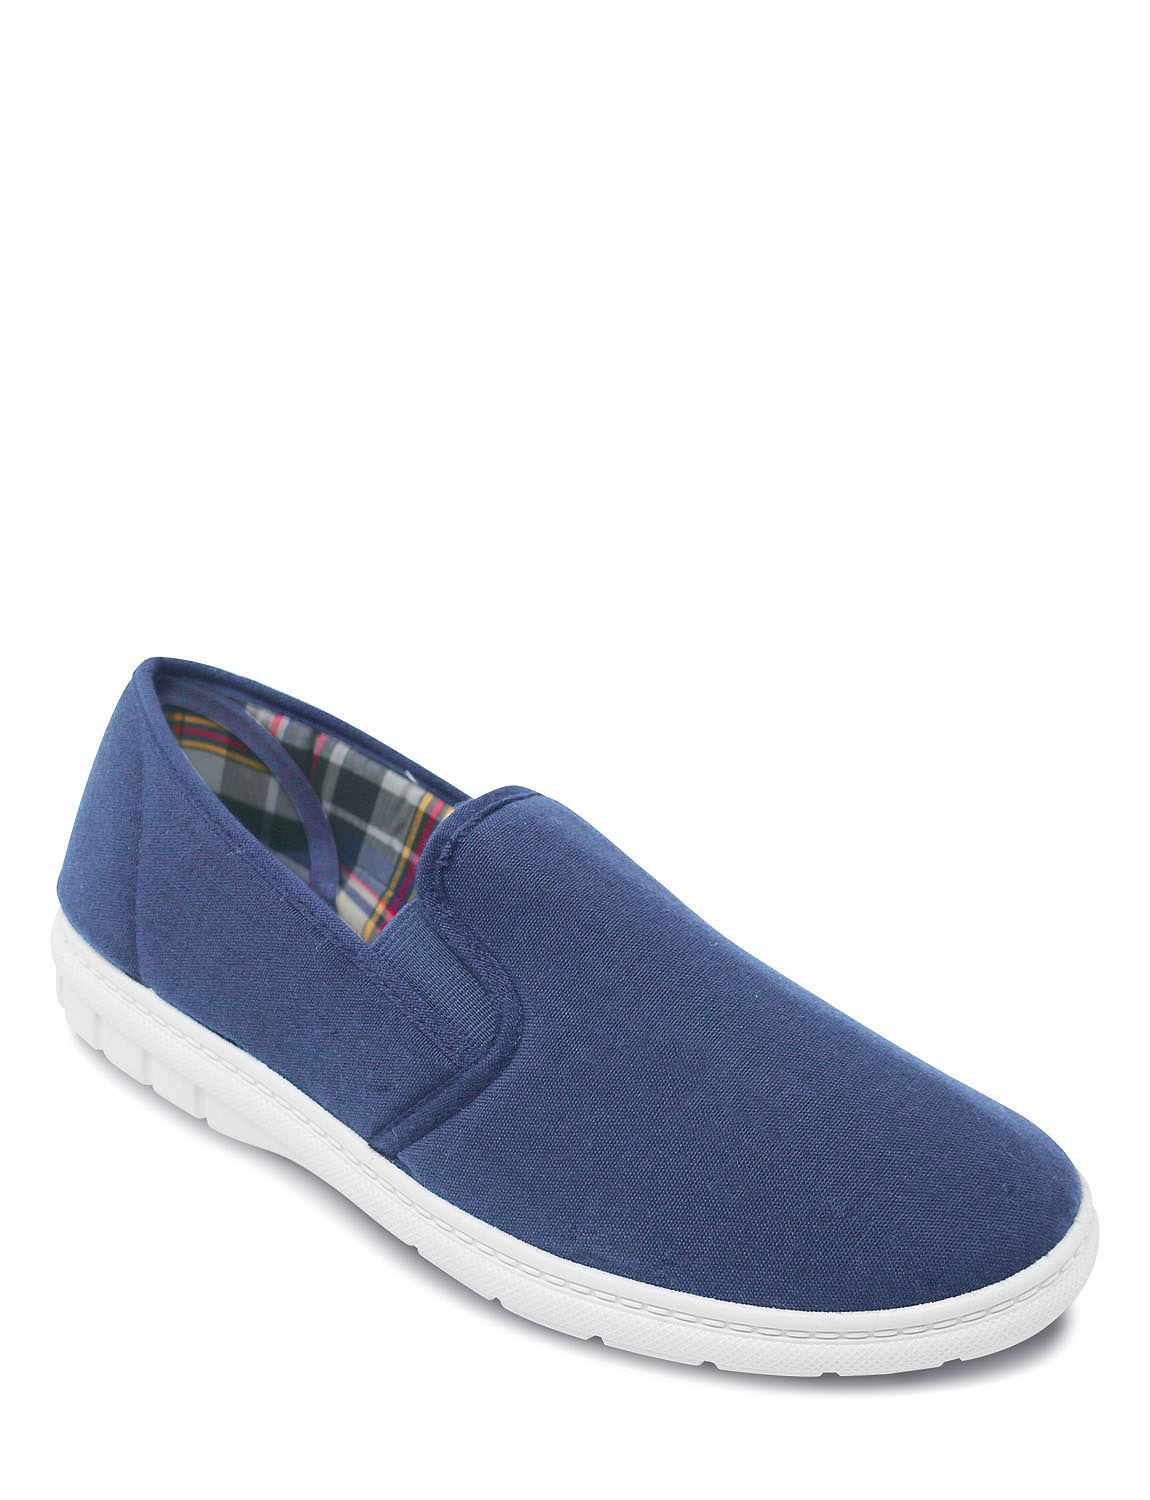 Canvas Wide Fit Elastic Gusset Slip On Shoe | Chums